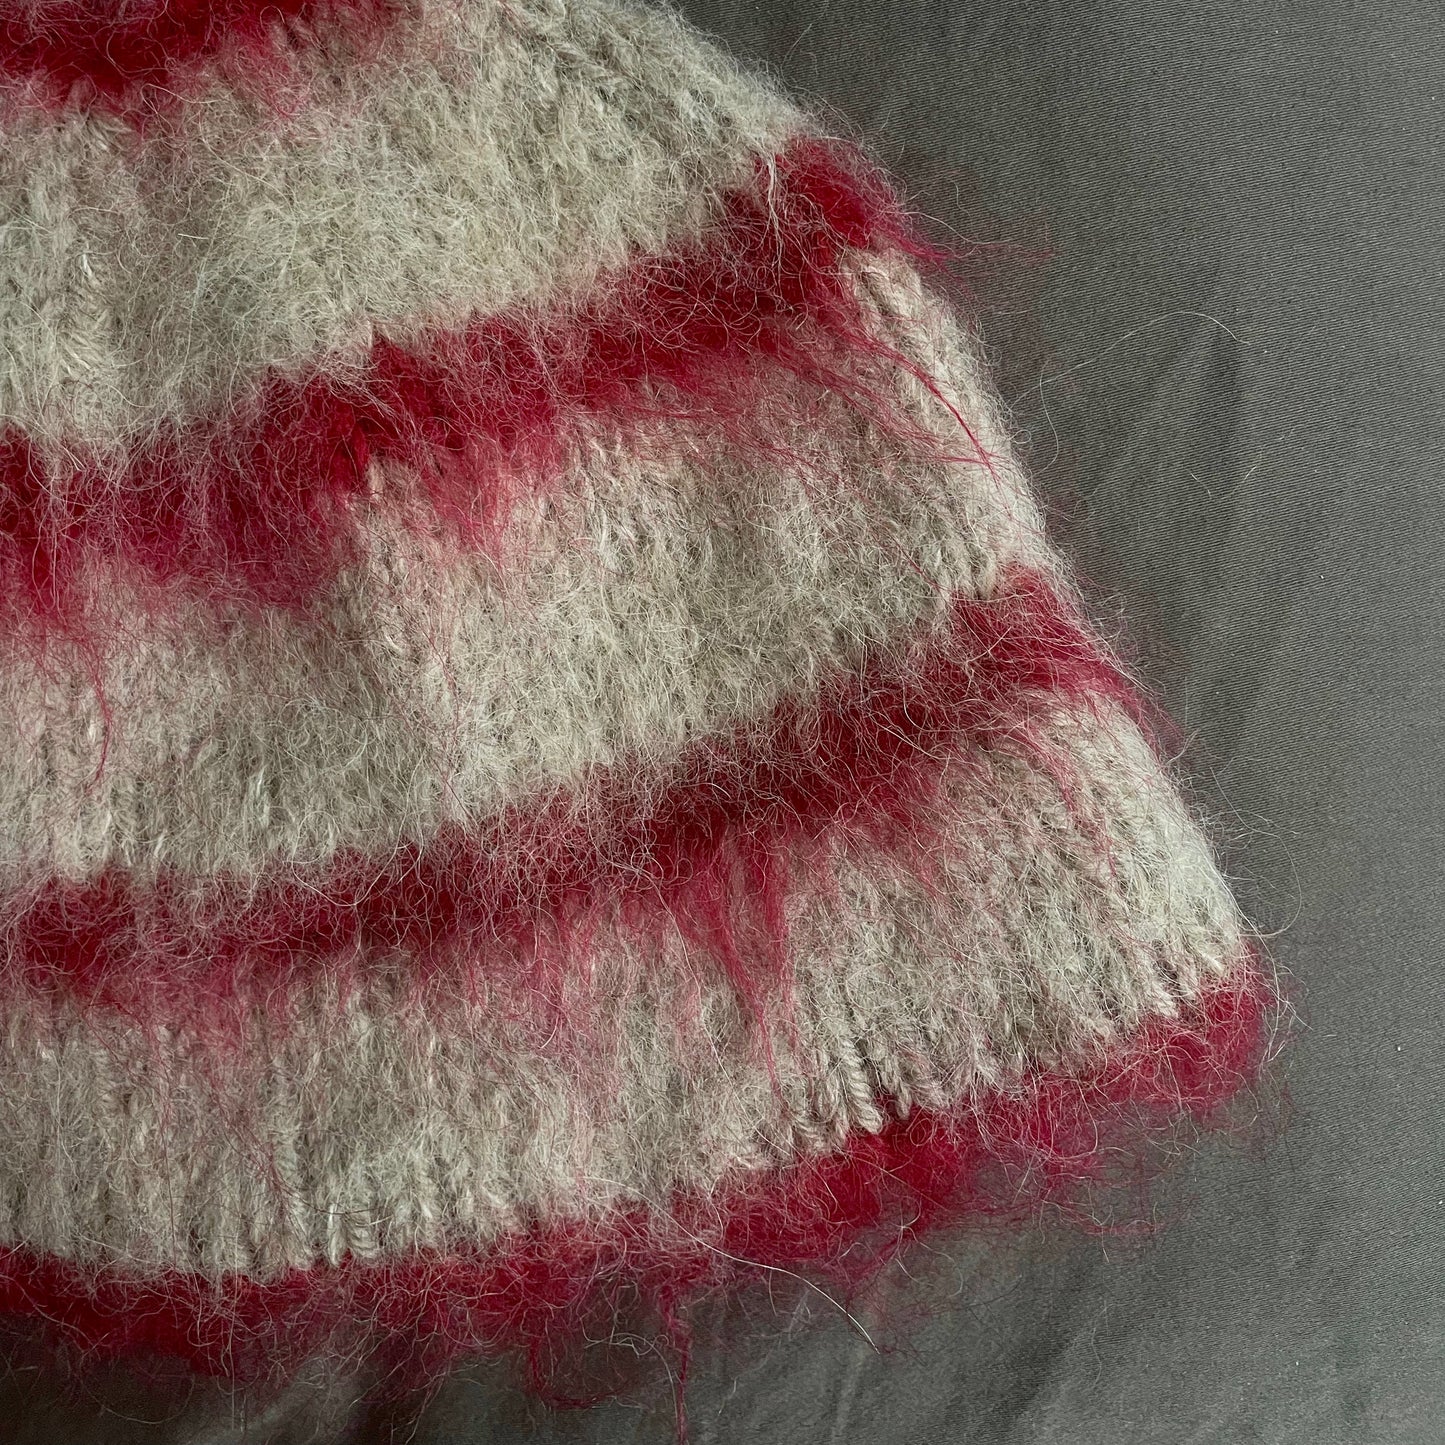 Beige beanie with red stripes